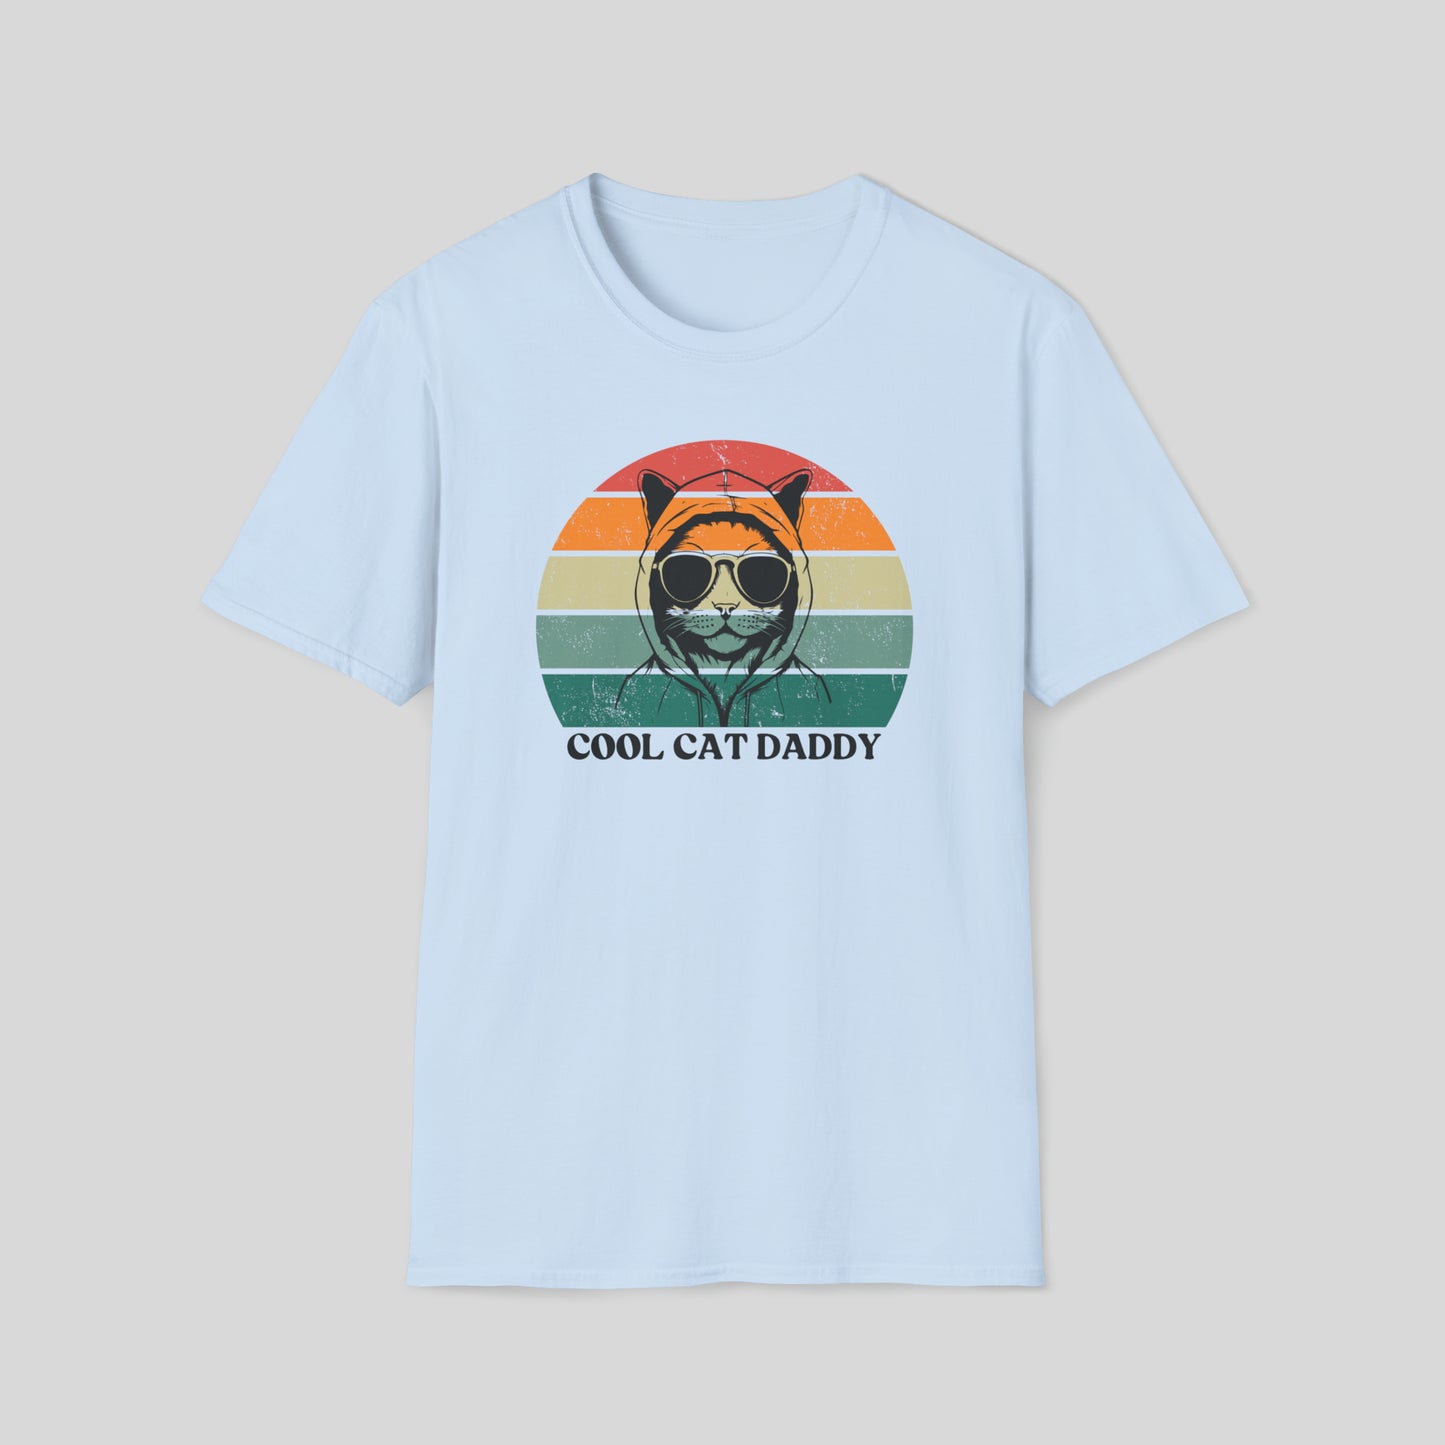 COOL CAT DADDY T-SHIRT